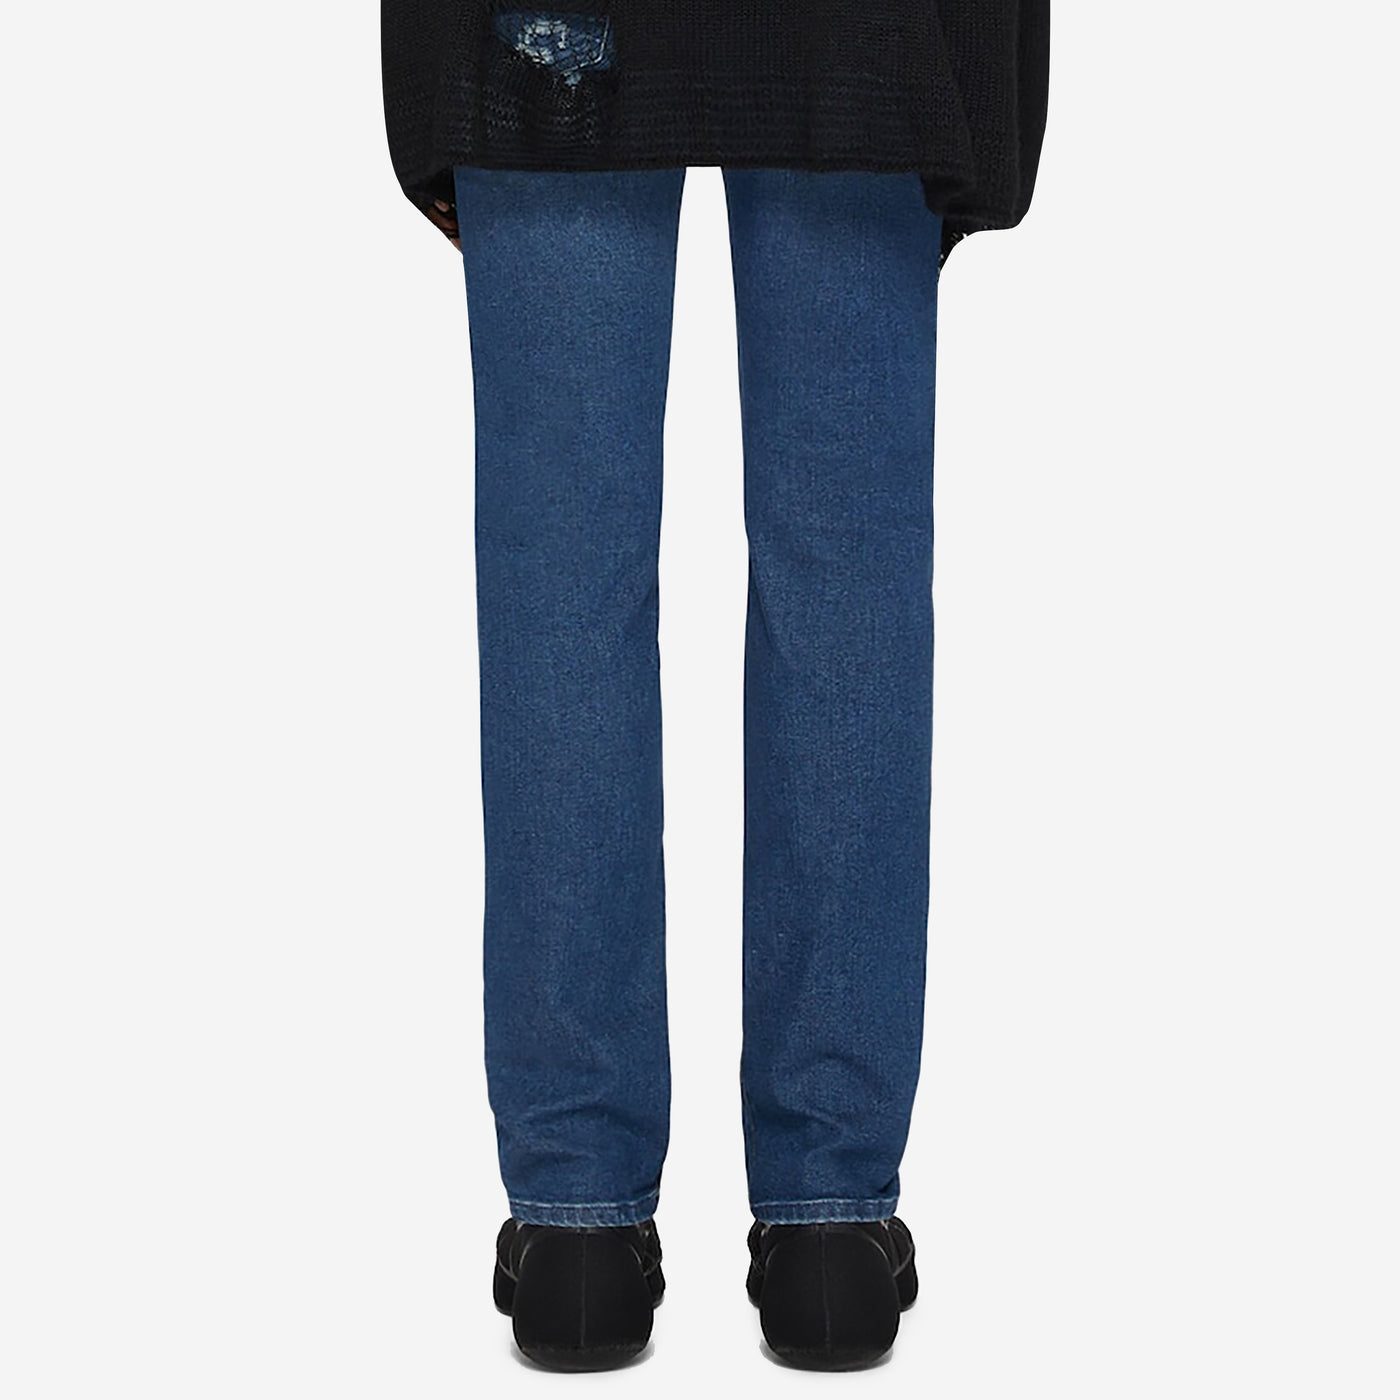 Givenchy Slim Fit Destroyed Jeans